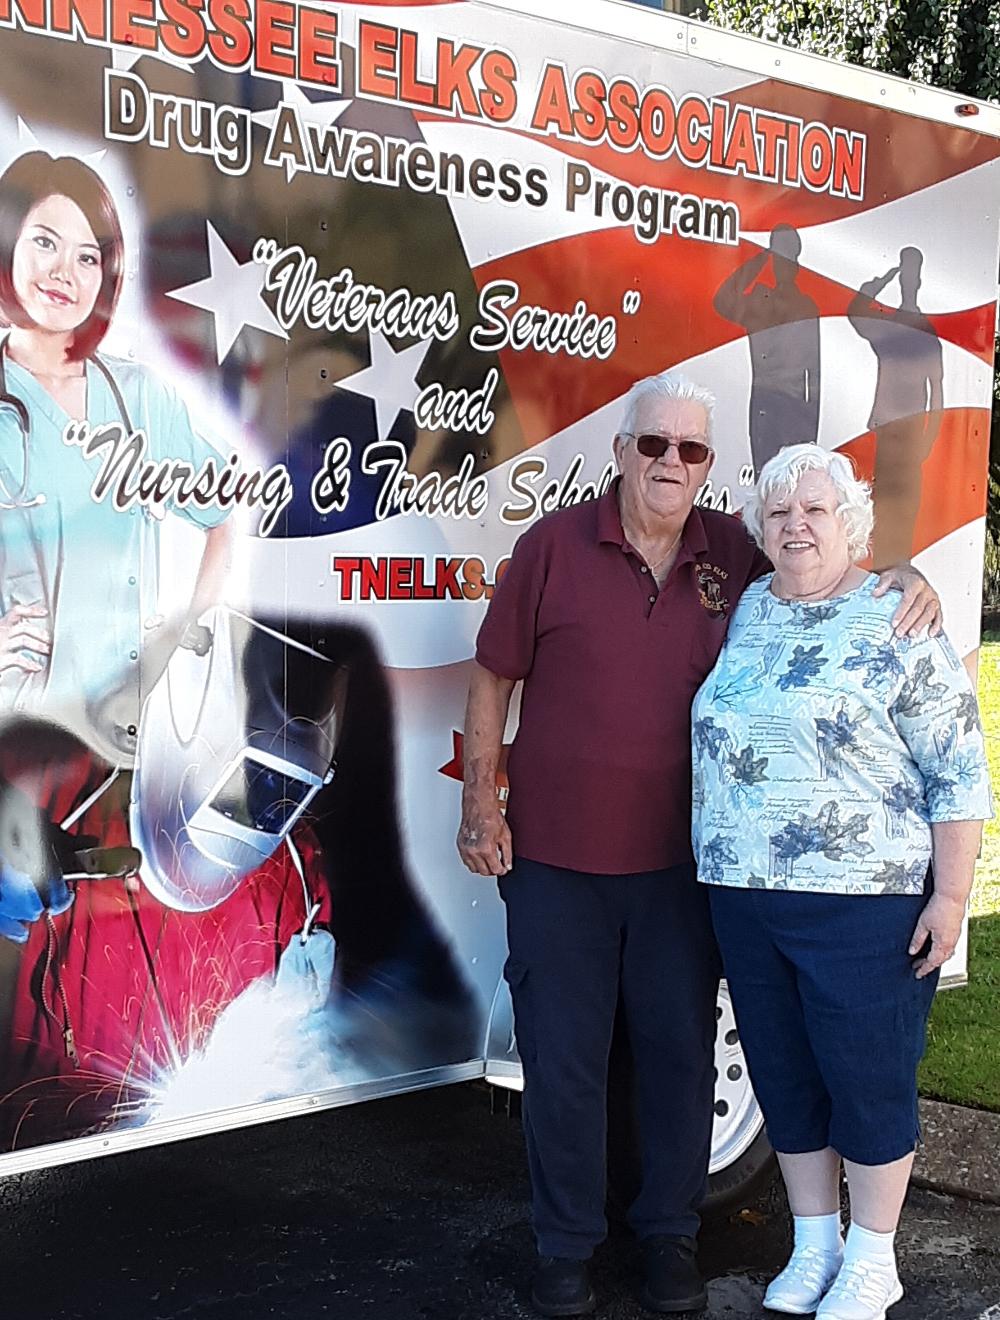 Trustee Ken Apley and wife, Nola Apley our treasurer stand next to the new "Drug Trailer" at the Mid Year Convention.